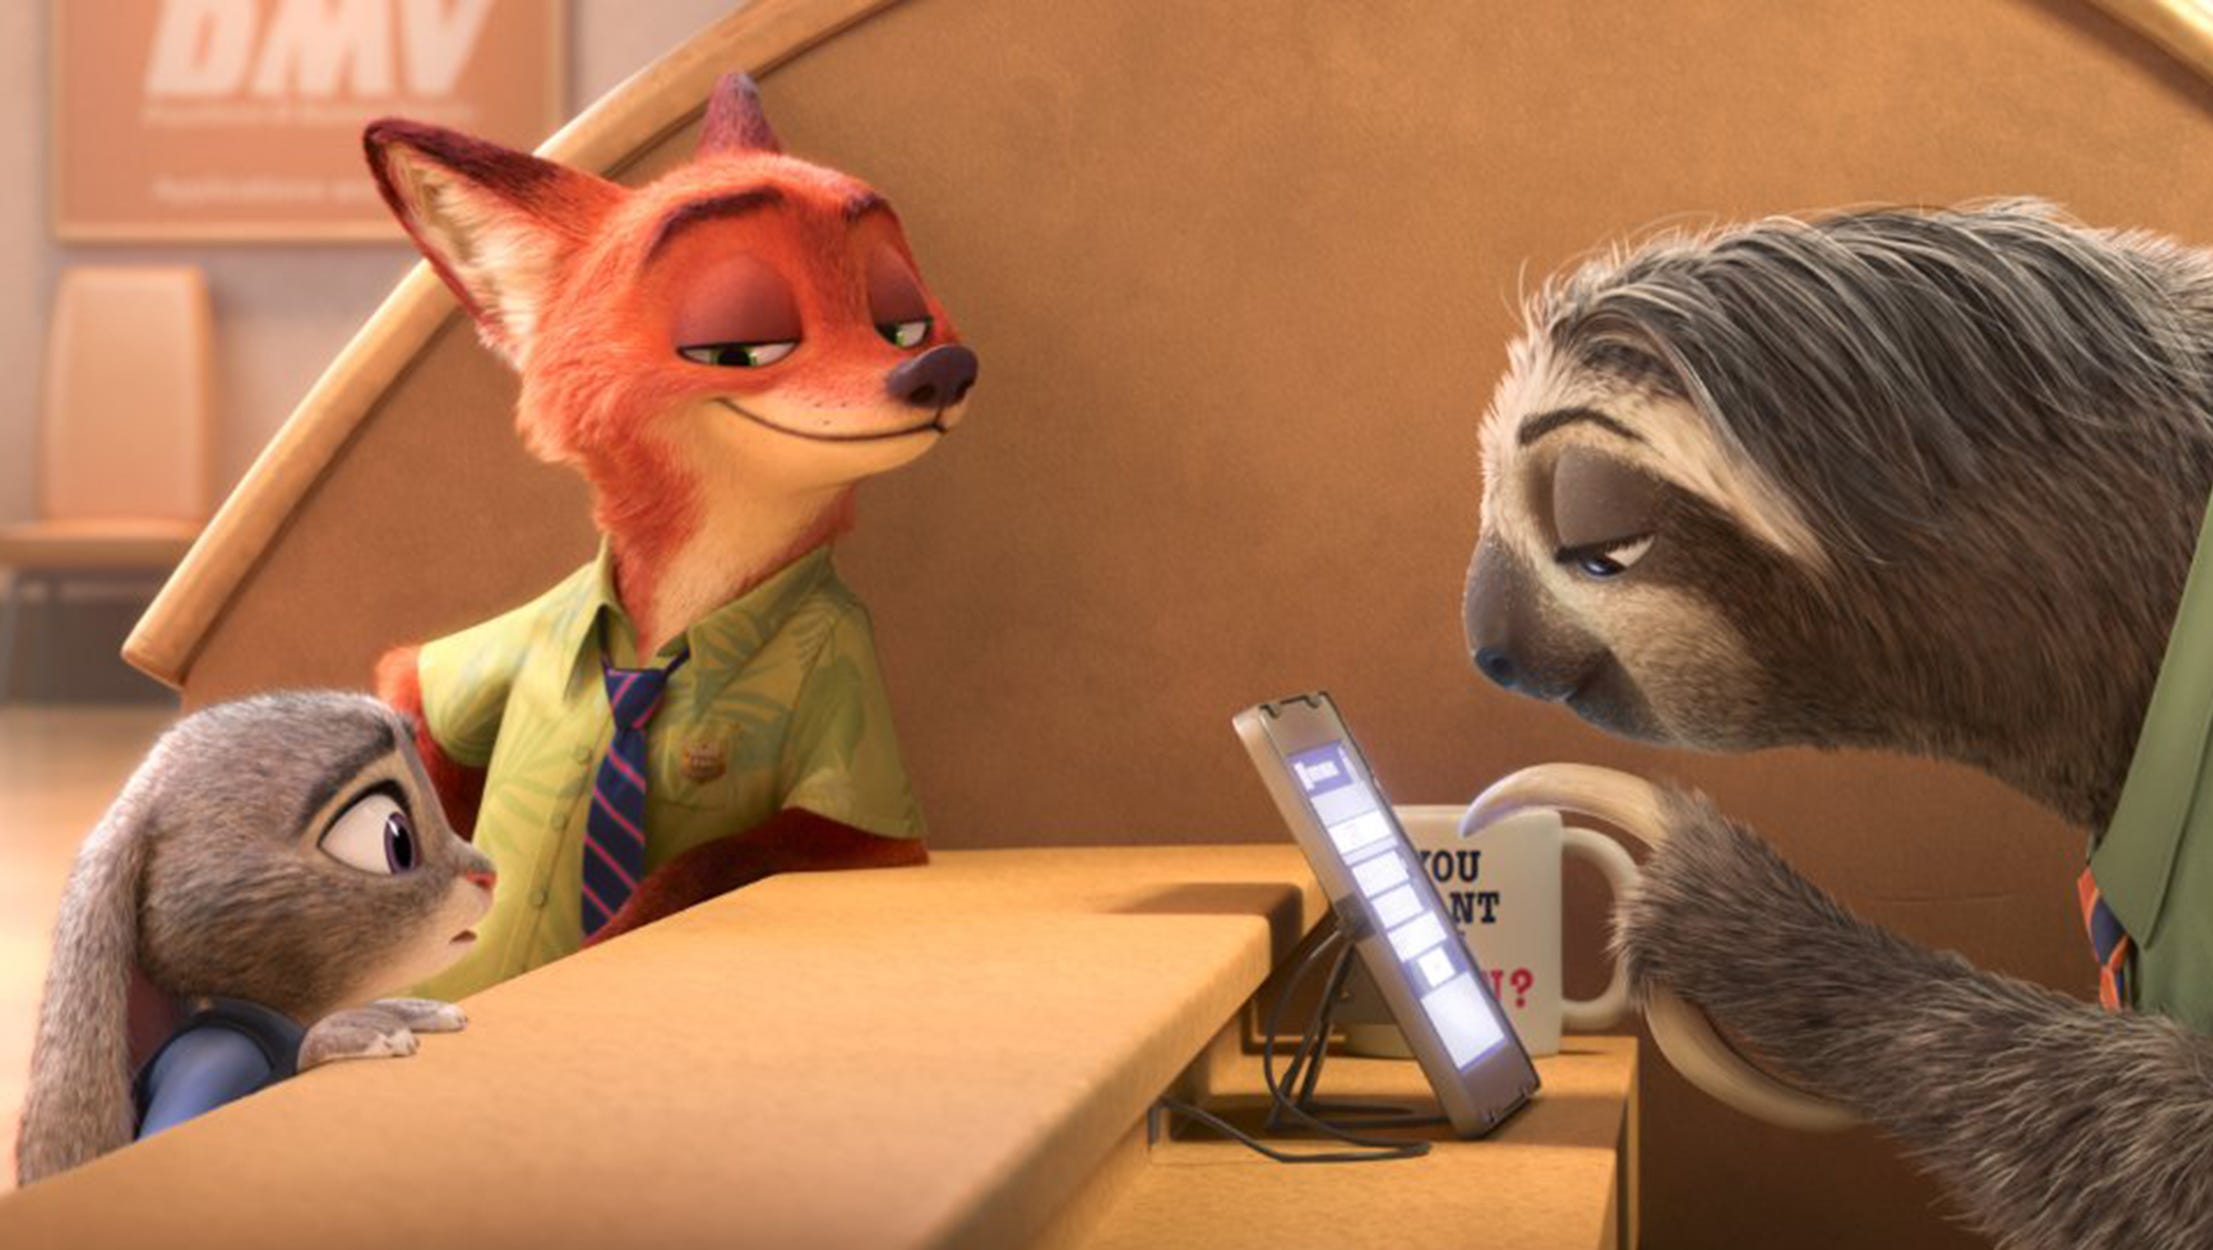 Review: Disney's 'Zootopia' might be more for adults